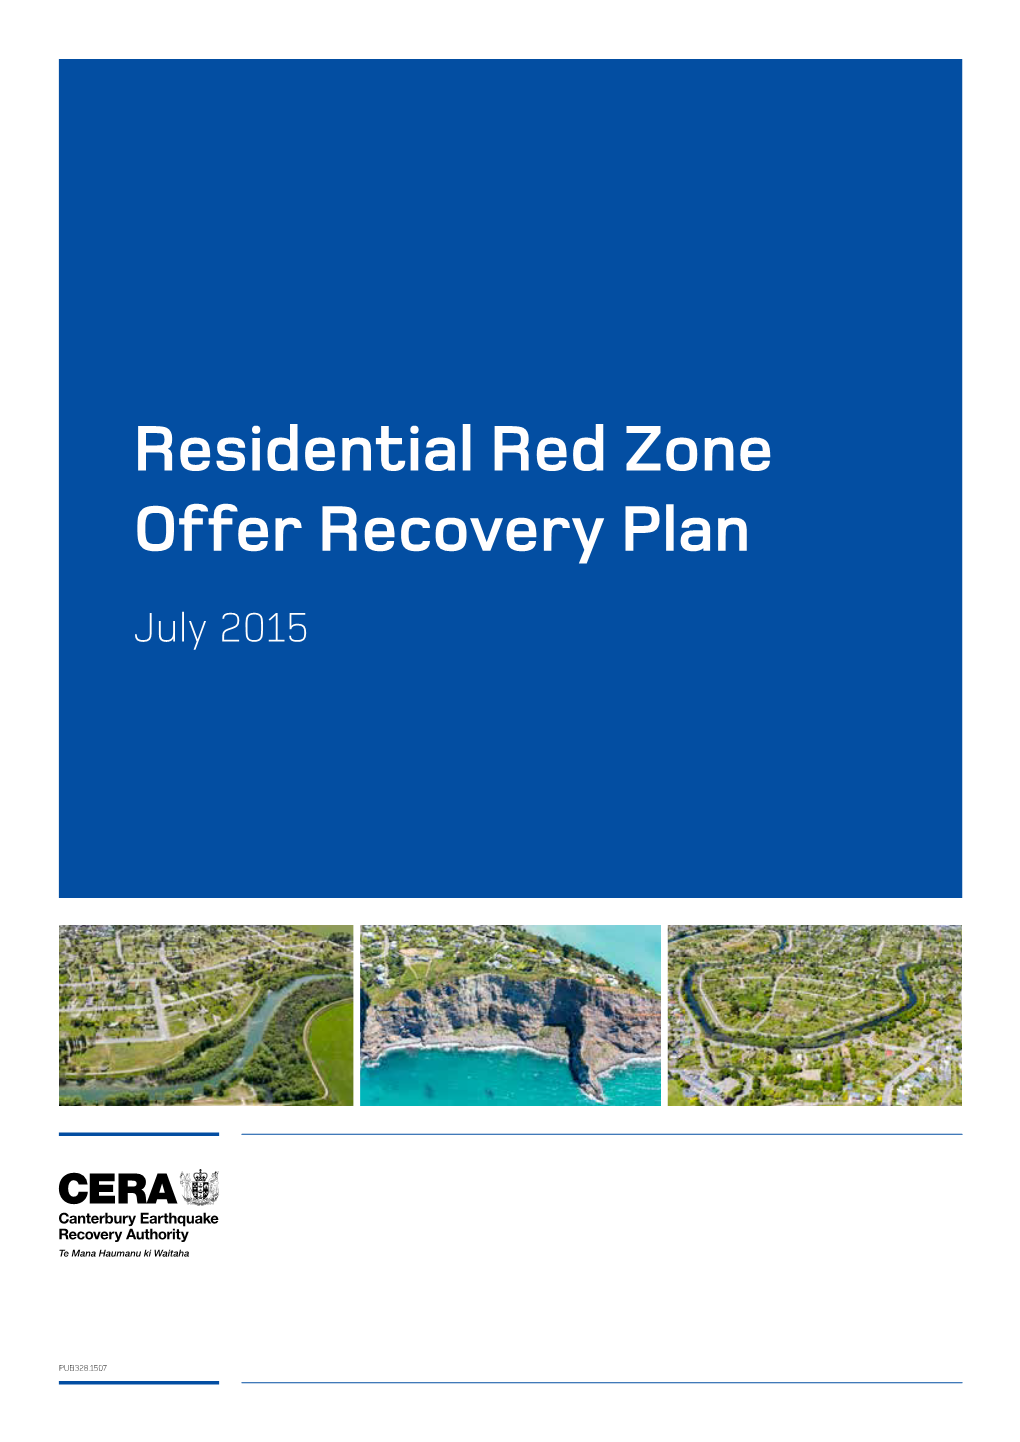 Residential Red Zone Offer Recovery Plan July 2015